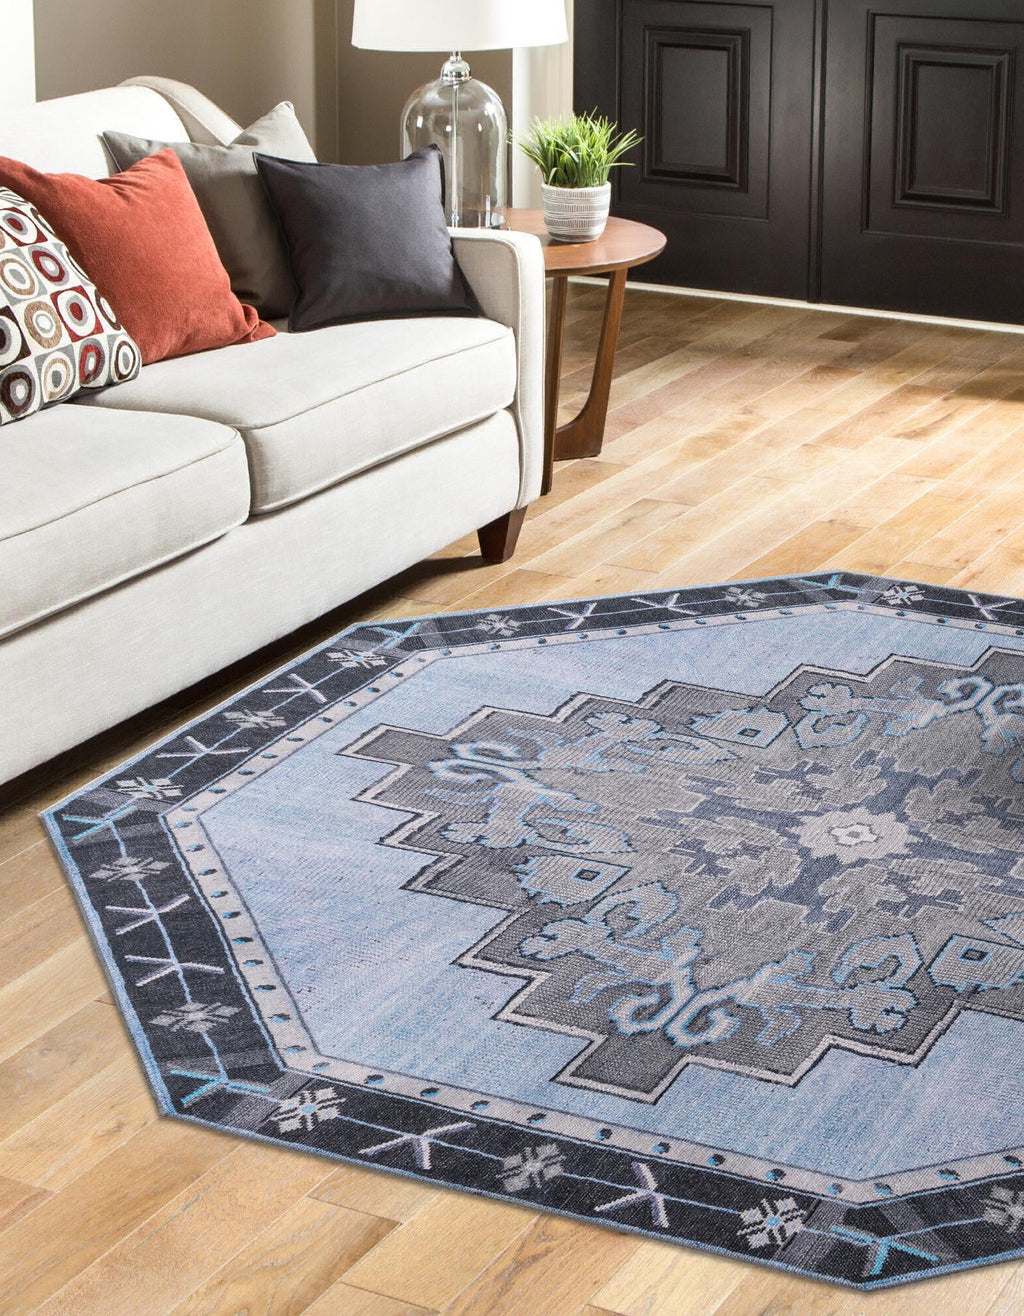 Unique Loom Timeless LEO-RVVL2 Blue Gray Area Rug Octagon Lifestyle Image Feature